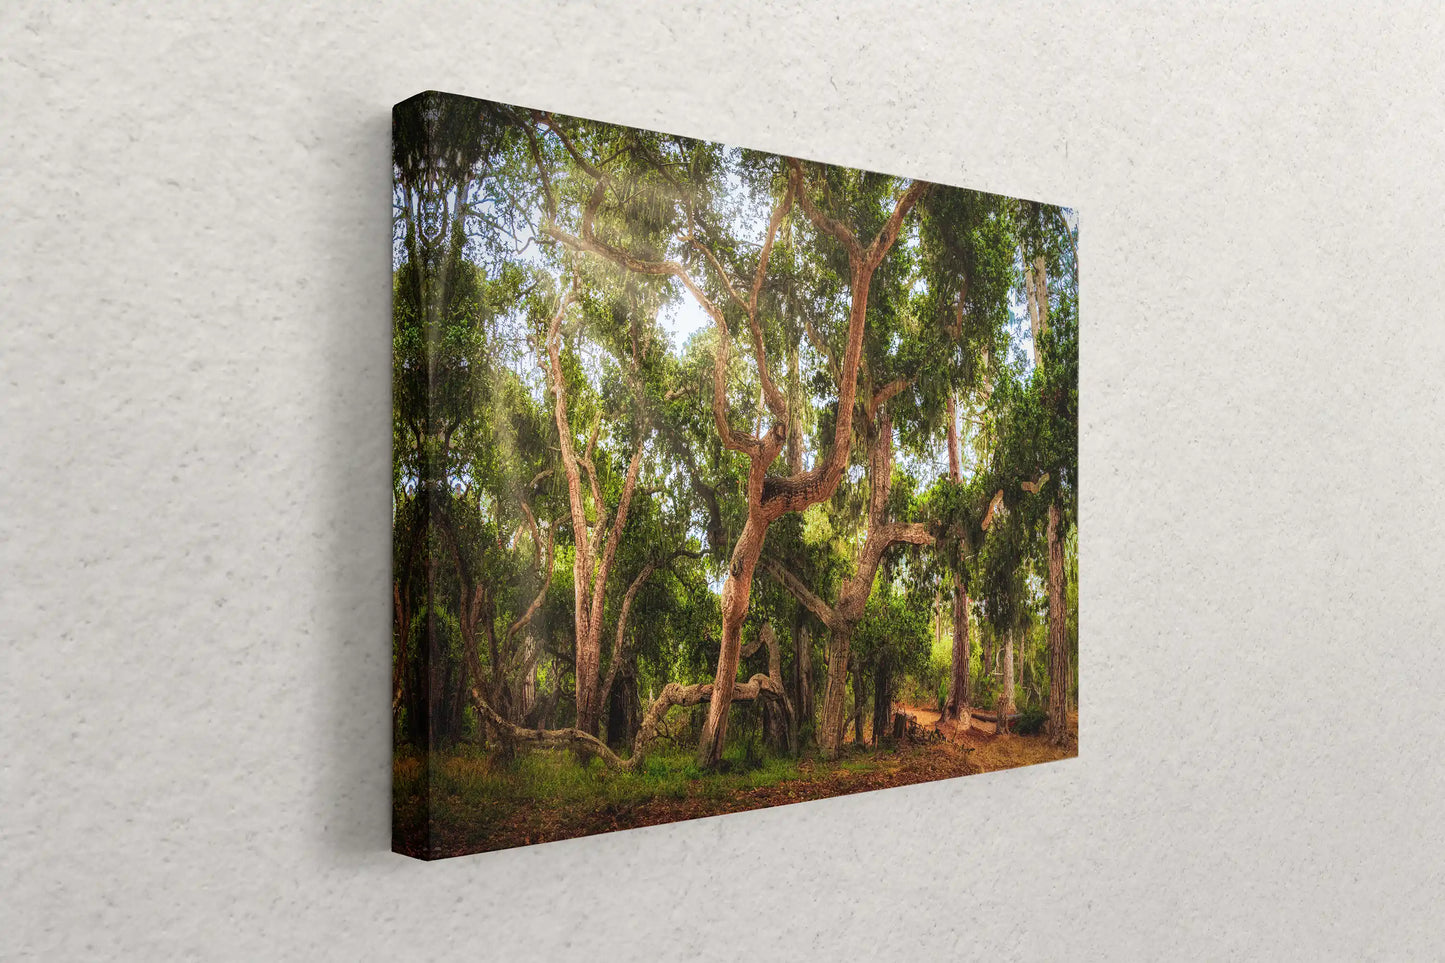 Side view of a Coast Live Oak Tree canvas art piece hanging on a wall, adding a touch of nature's beauty to the room.